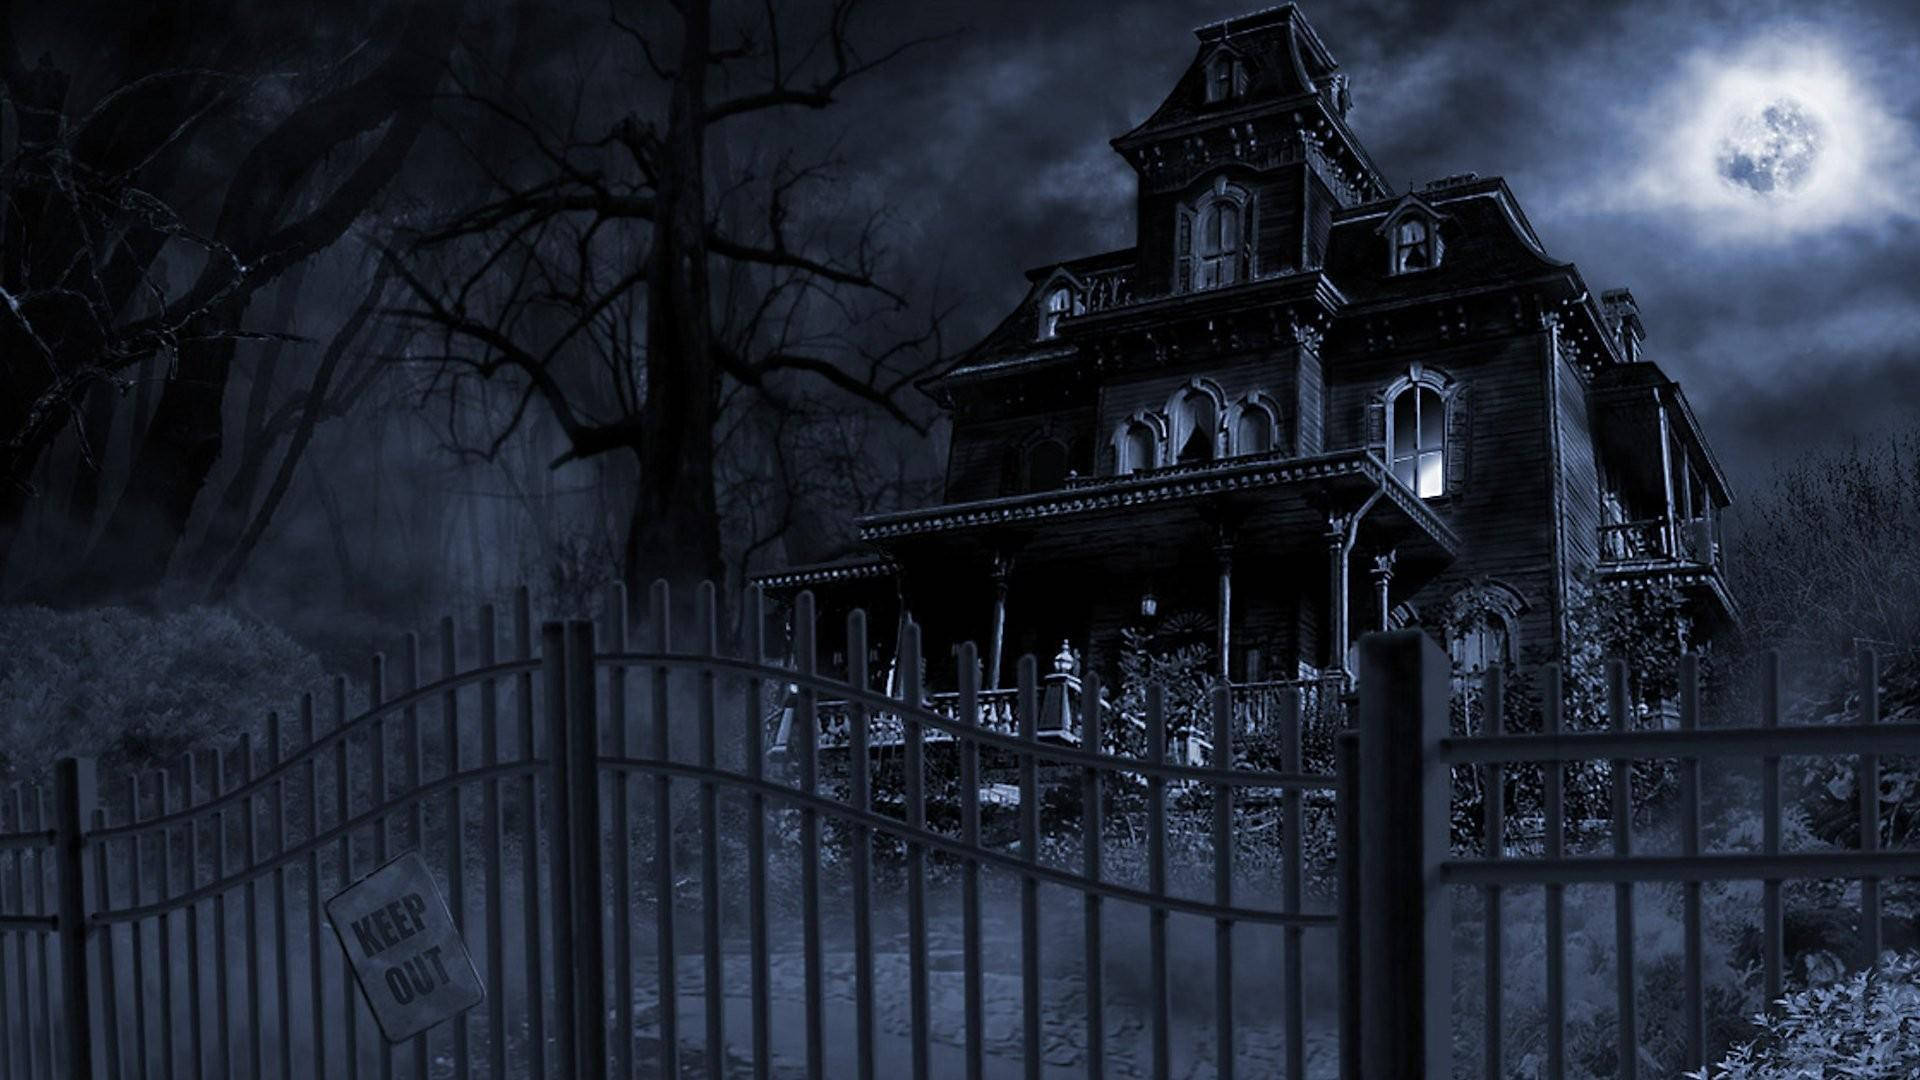 An Eerie Night at the Haunted House Wallpaper